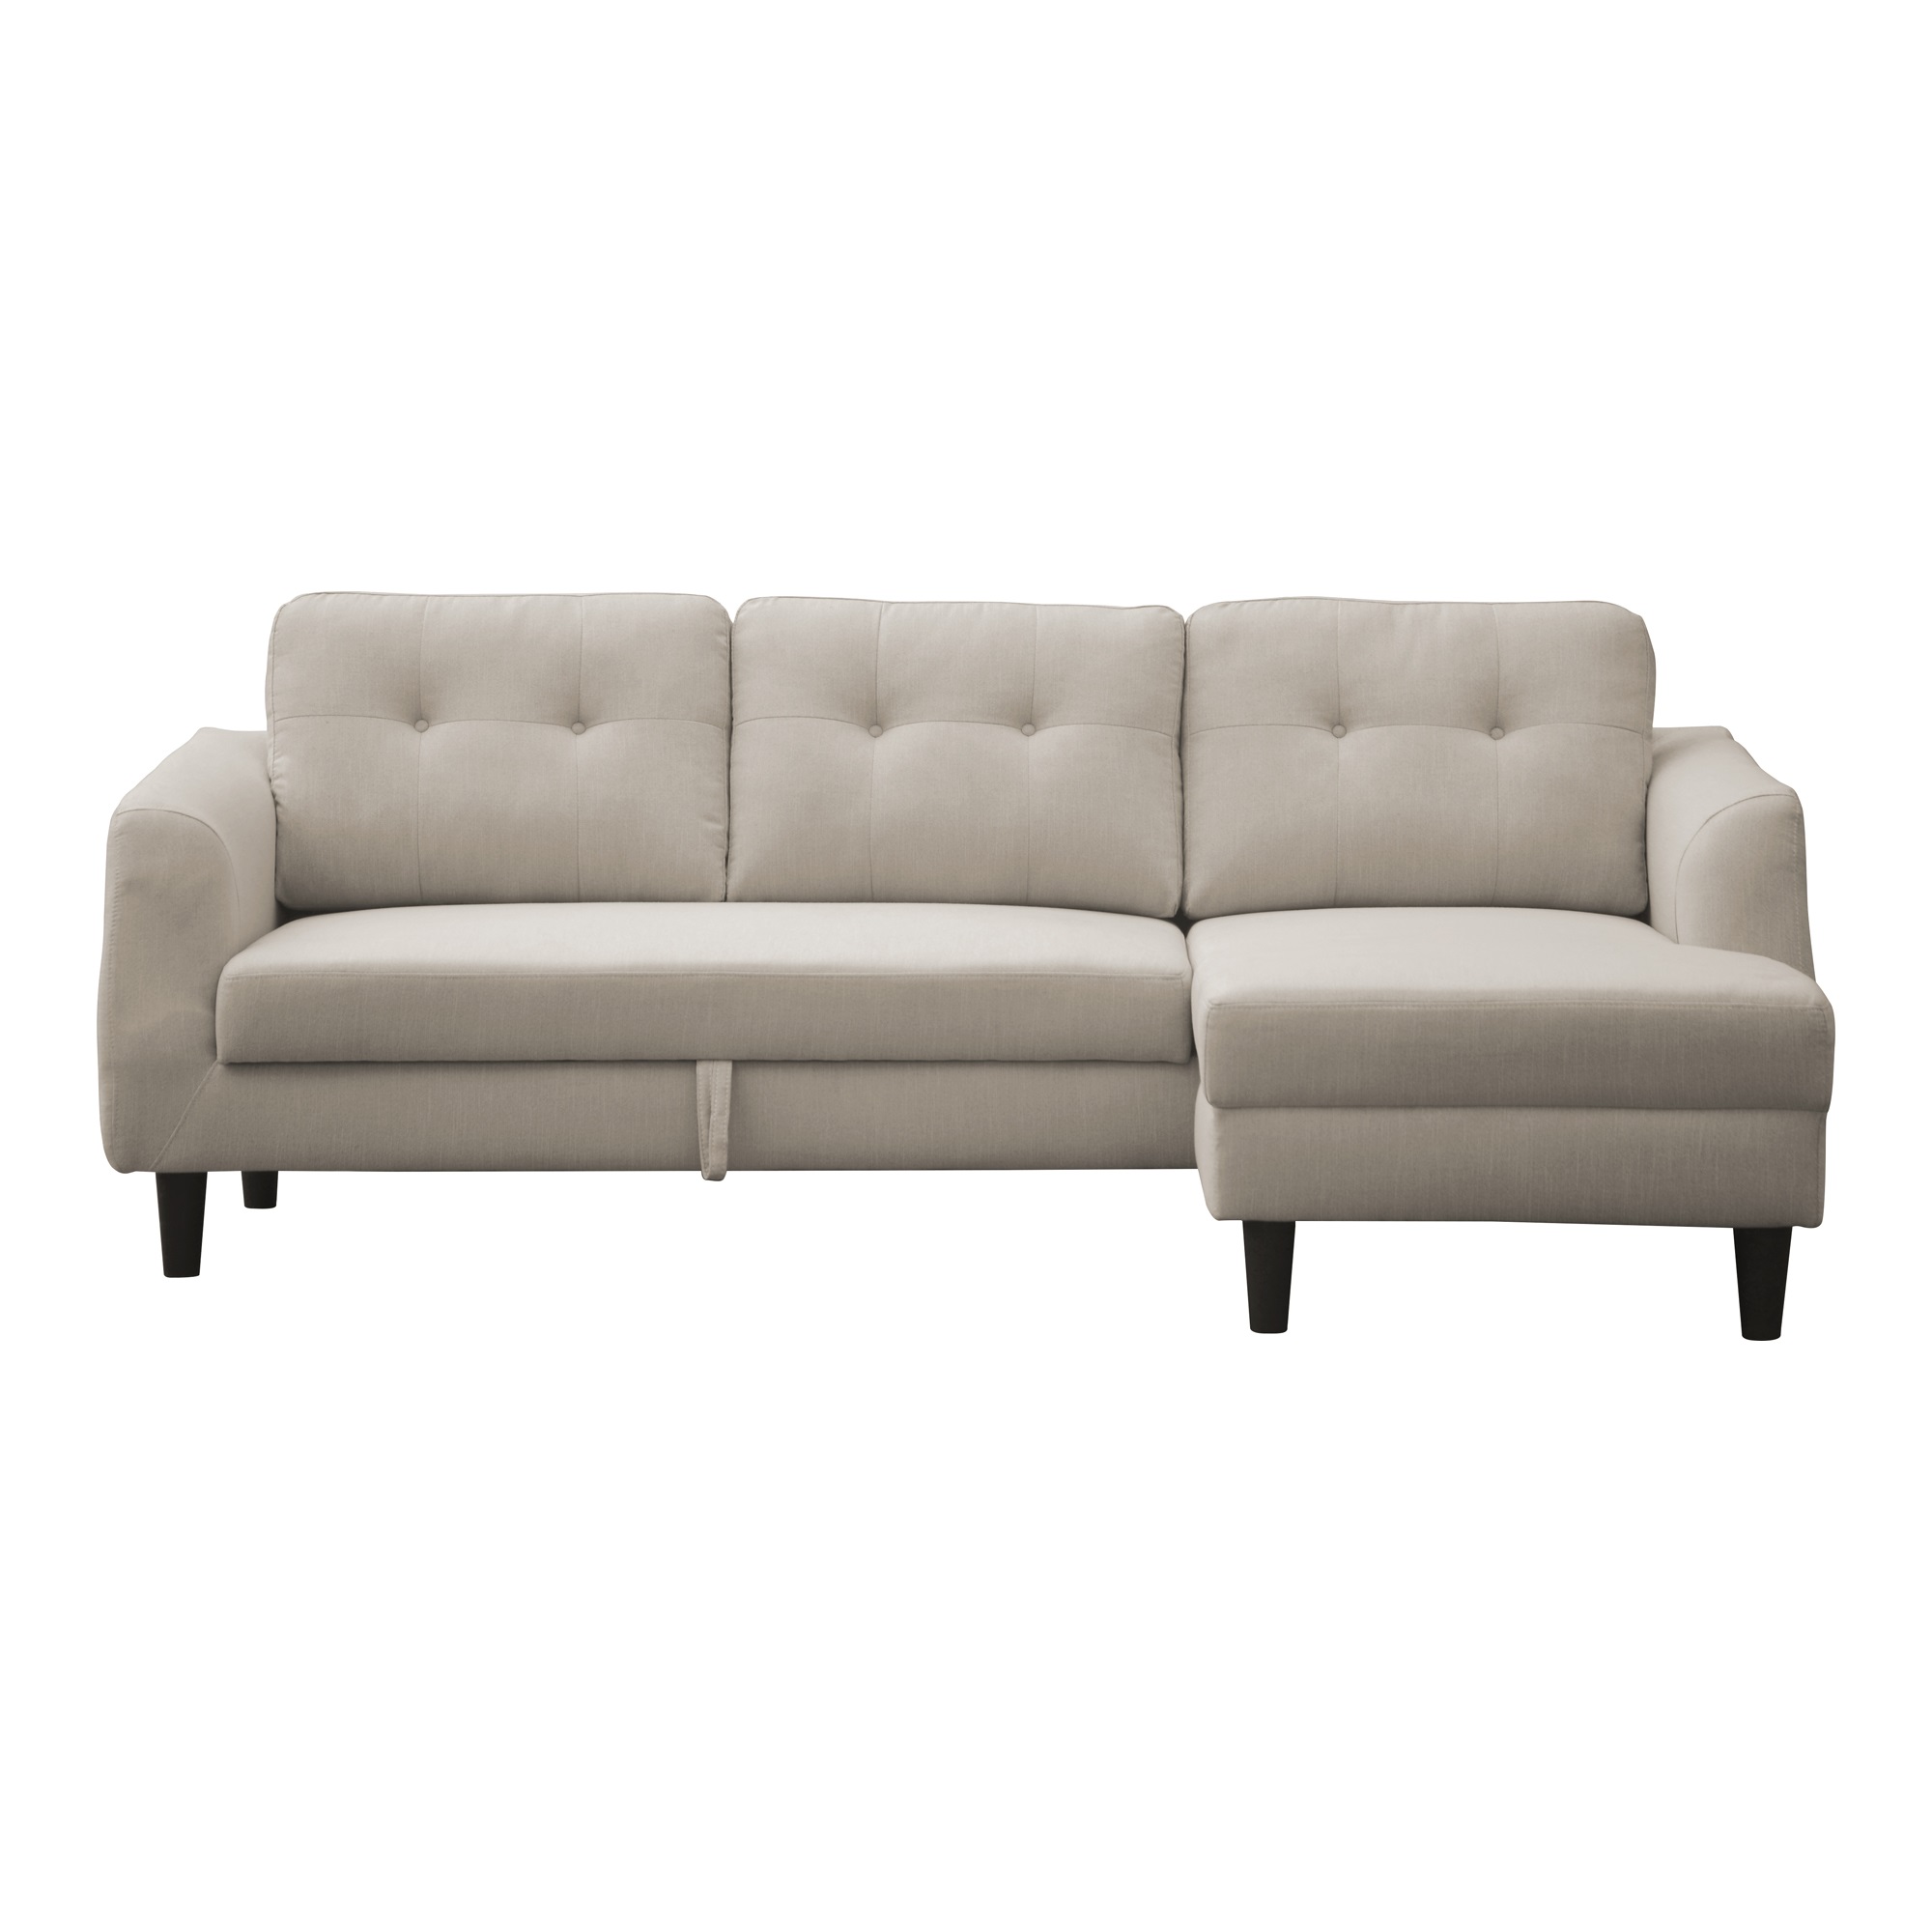 Moe's Home BELAGIO SOFA BED WITH CHAISE BEIGE RIGHT